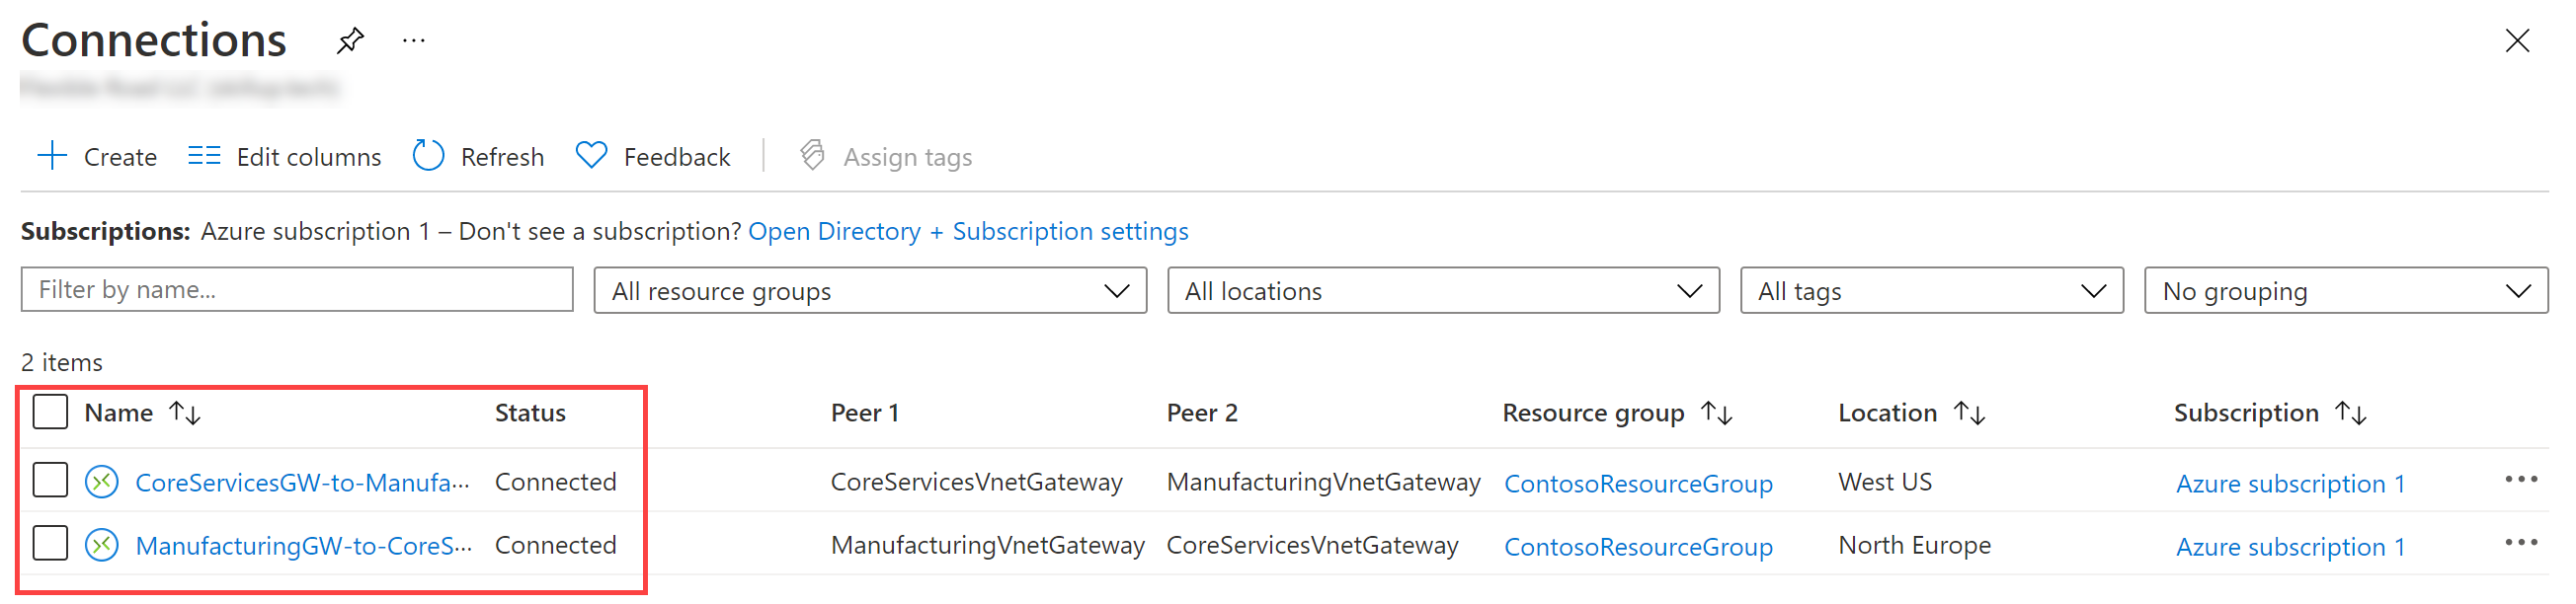 VPN Gateway connections successfully created.